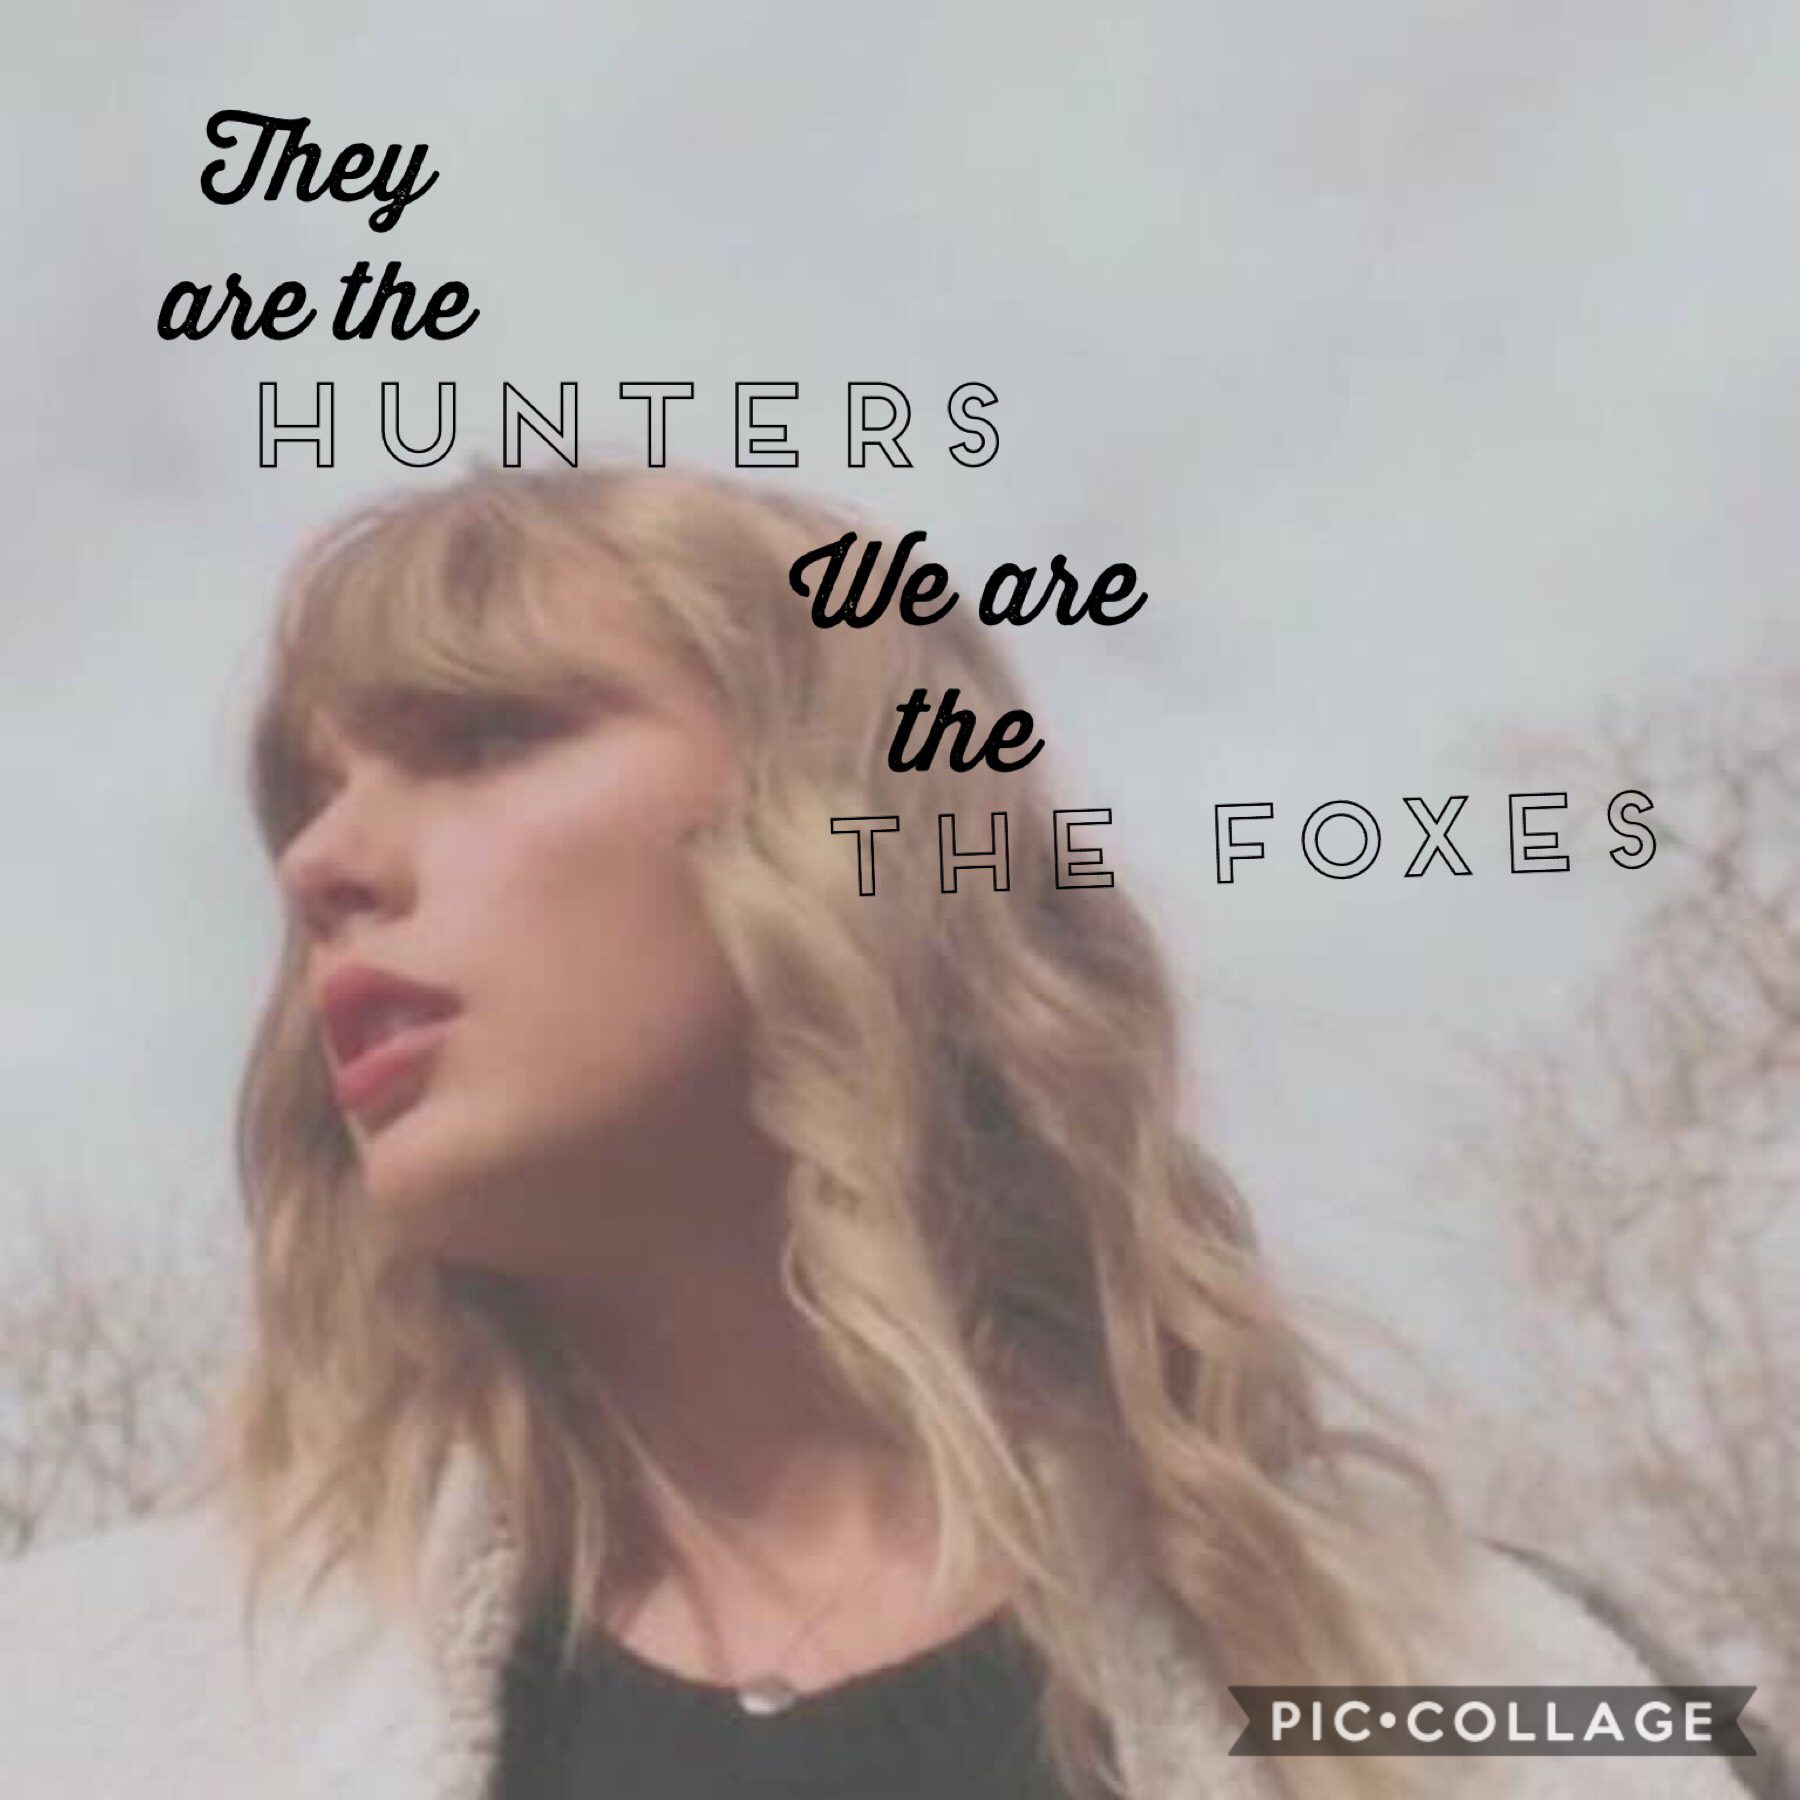 I know places ! Tap💛
Thanks to everythingswift for the background💕
QOTD: What is ur favourite Taylor Swift Song
AOTD:This Love, back to December, Holy Ground, Clean, Ours, New Years Day and Dear John, 